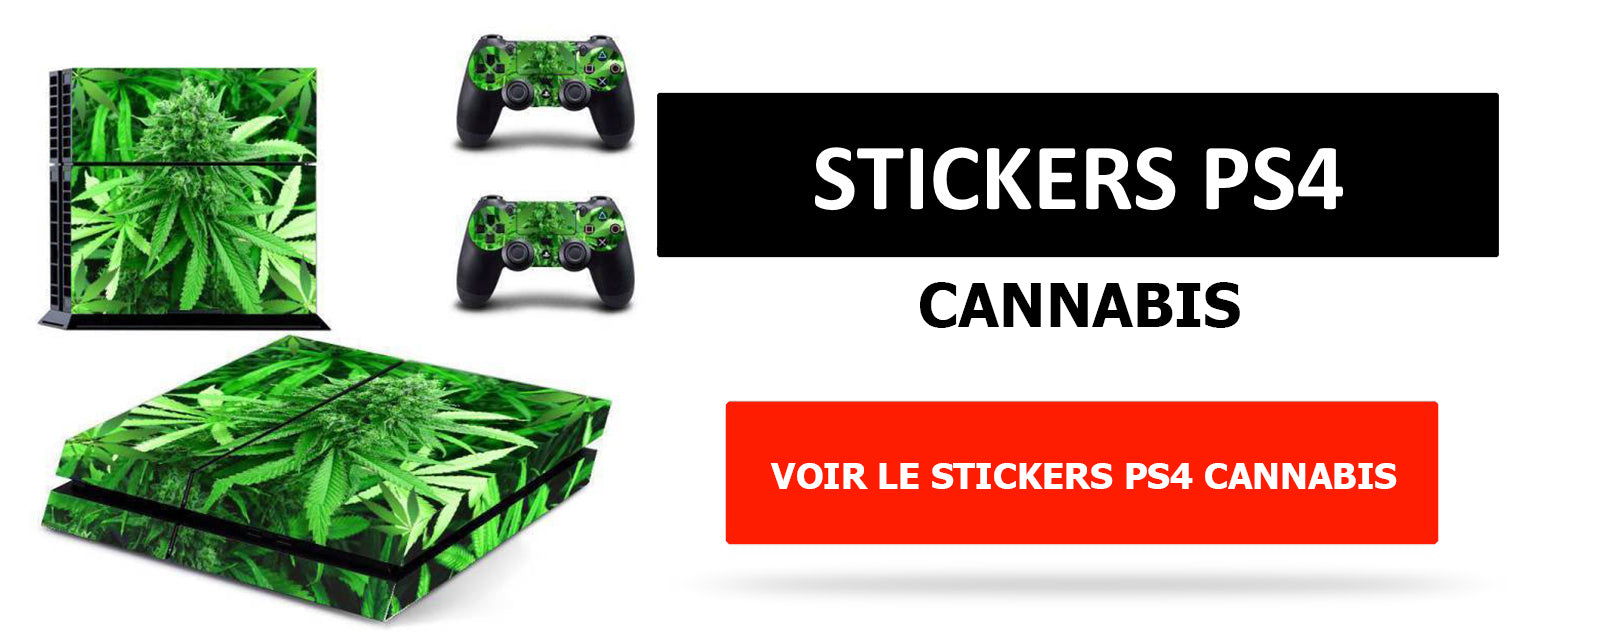 stickers ps4 cannabis